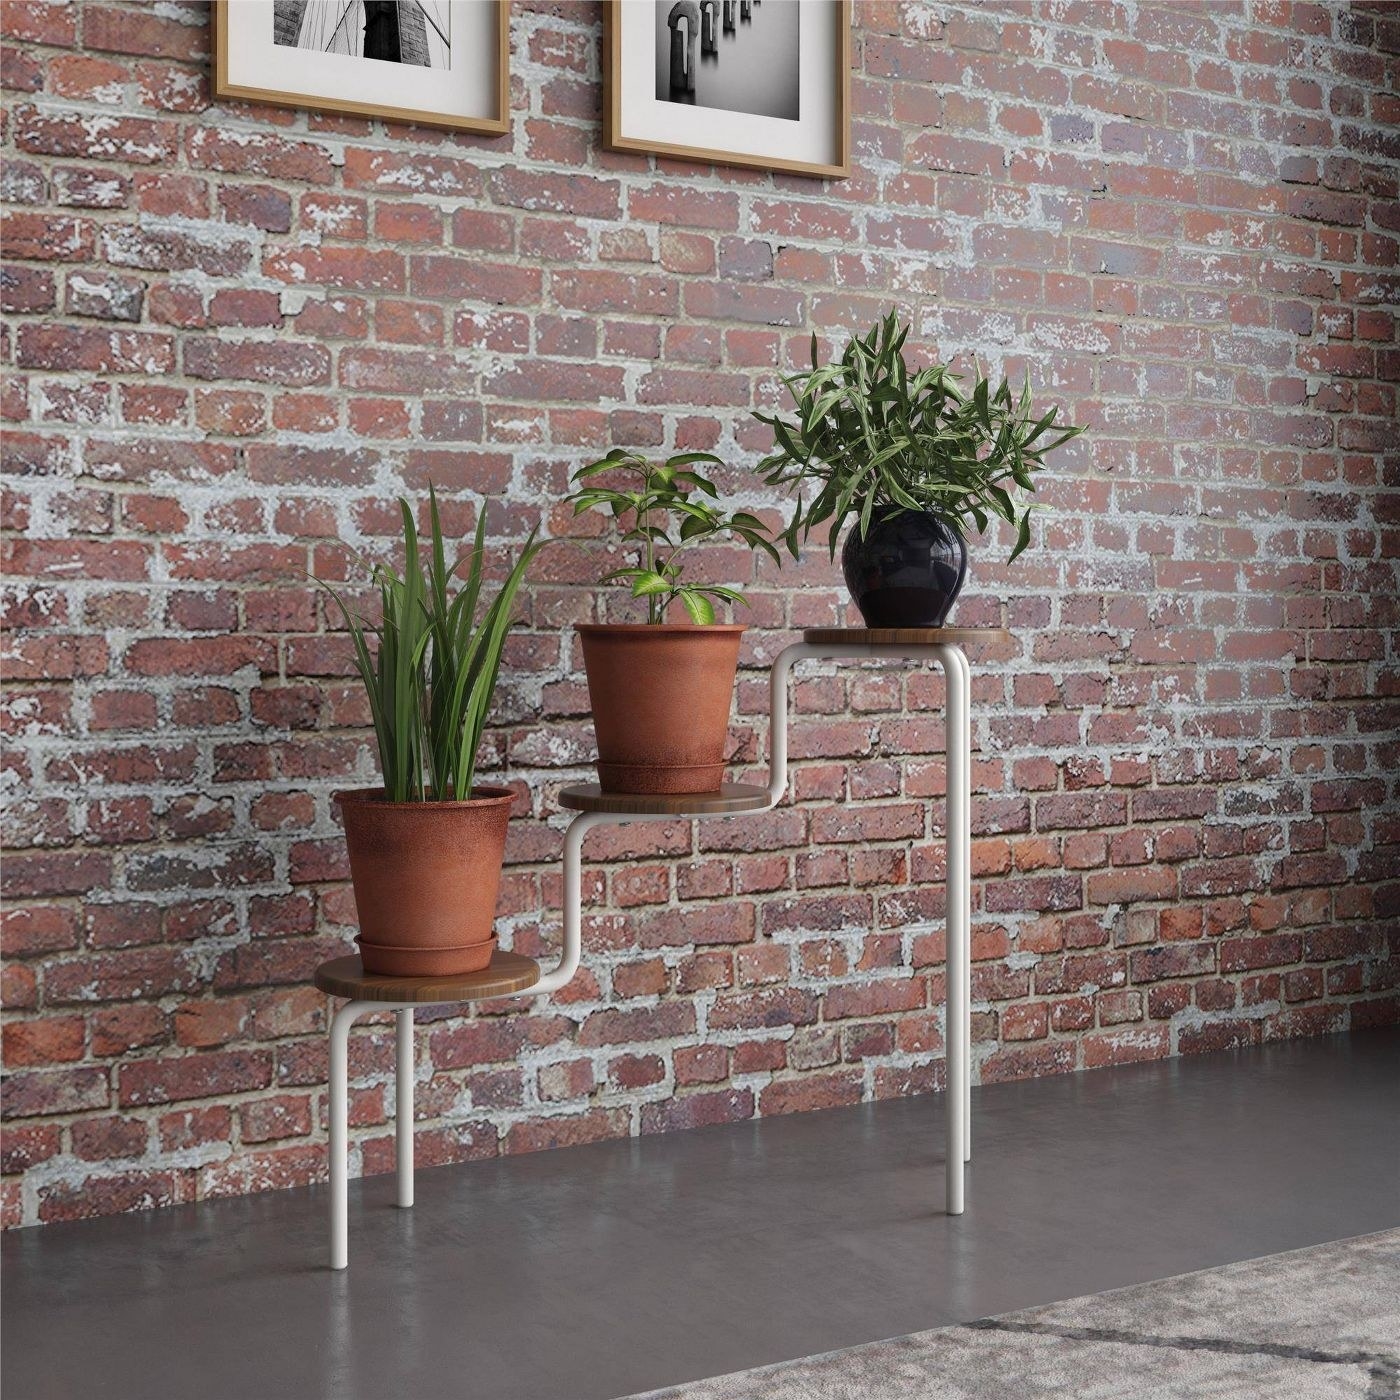 three-tier plant stand in front of an exposed brick wall